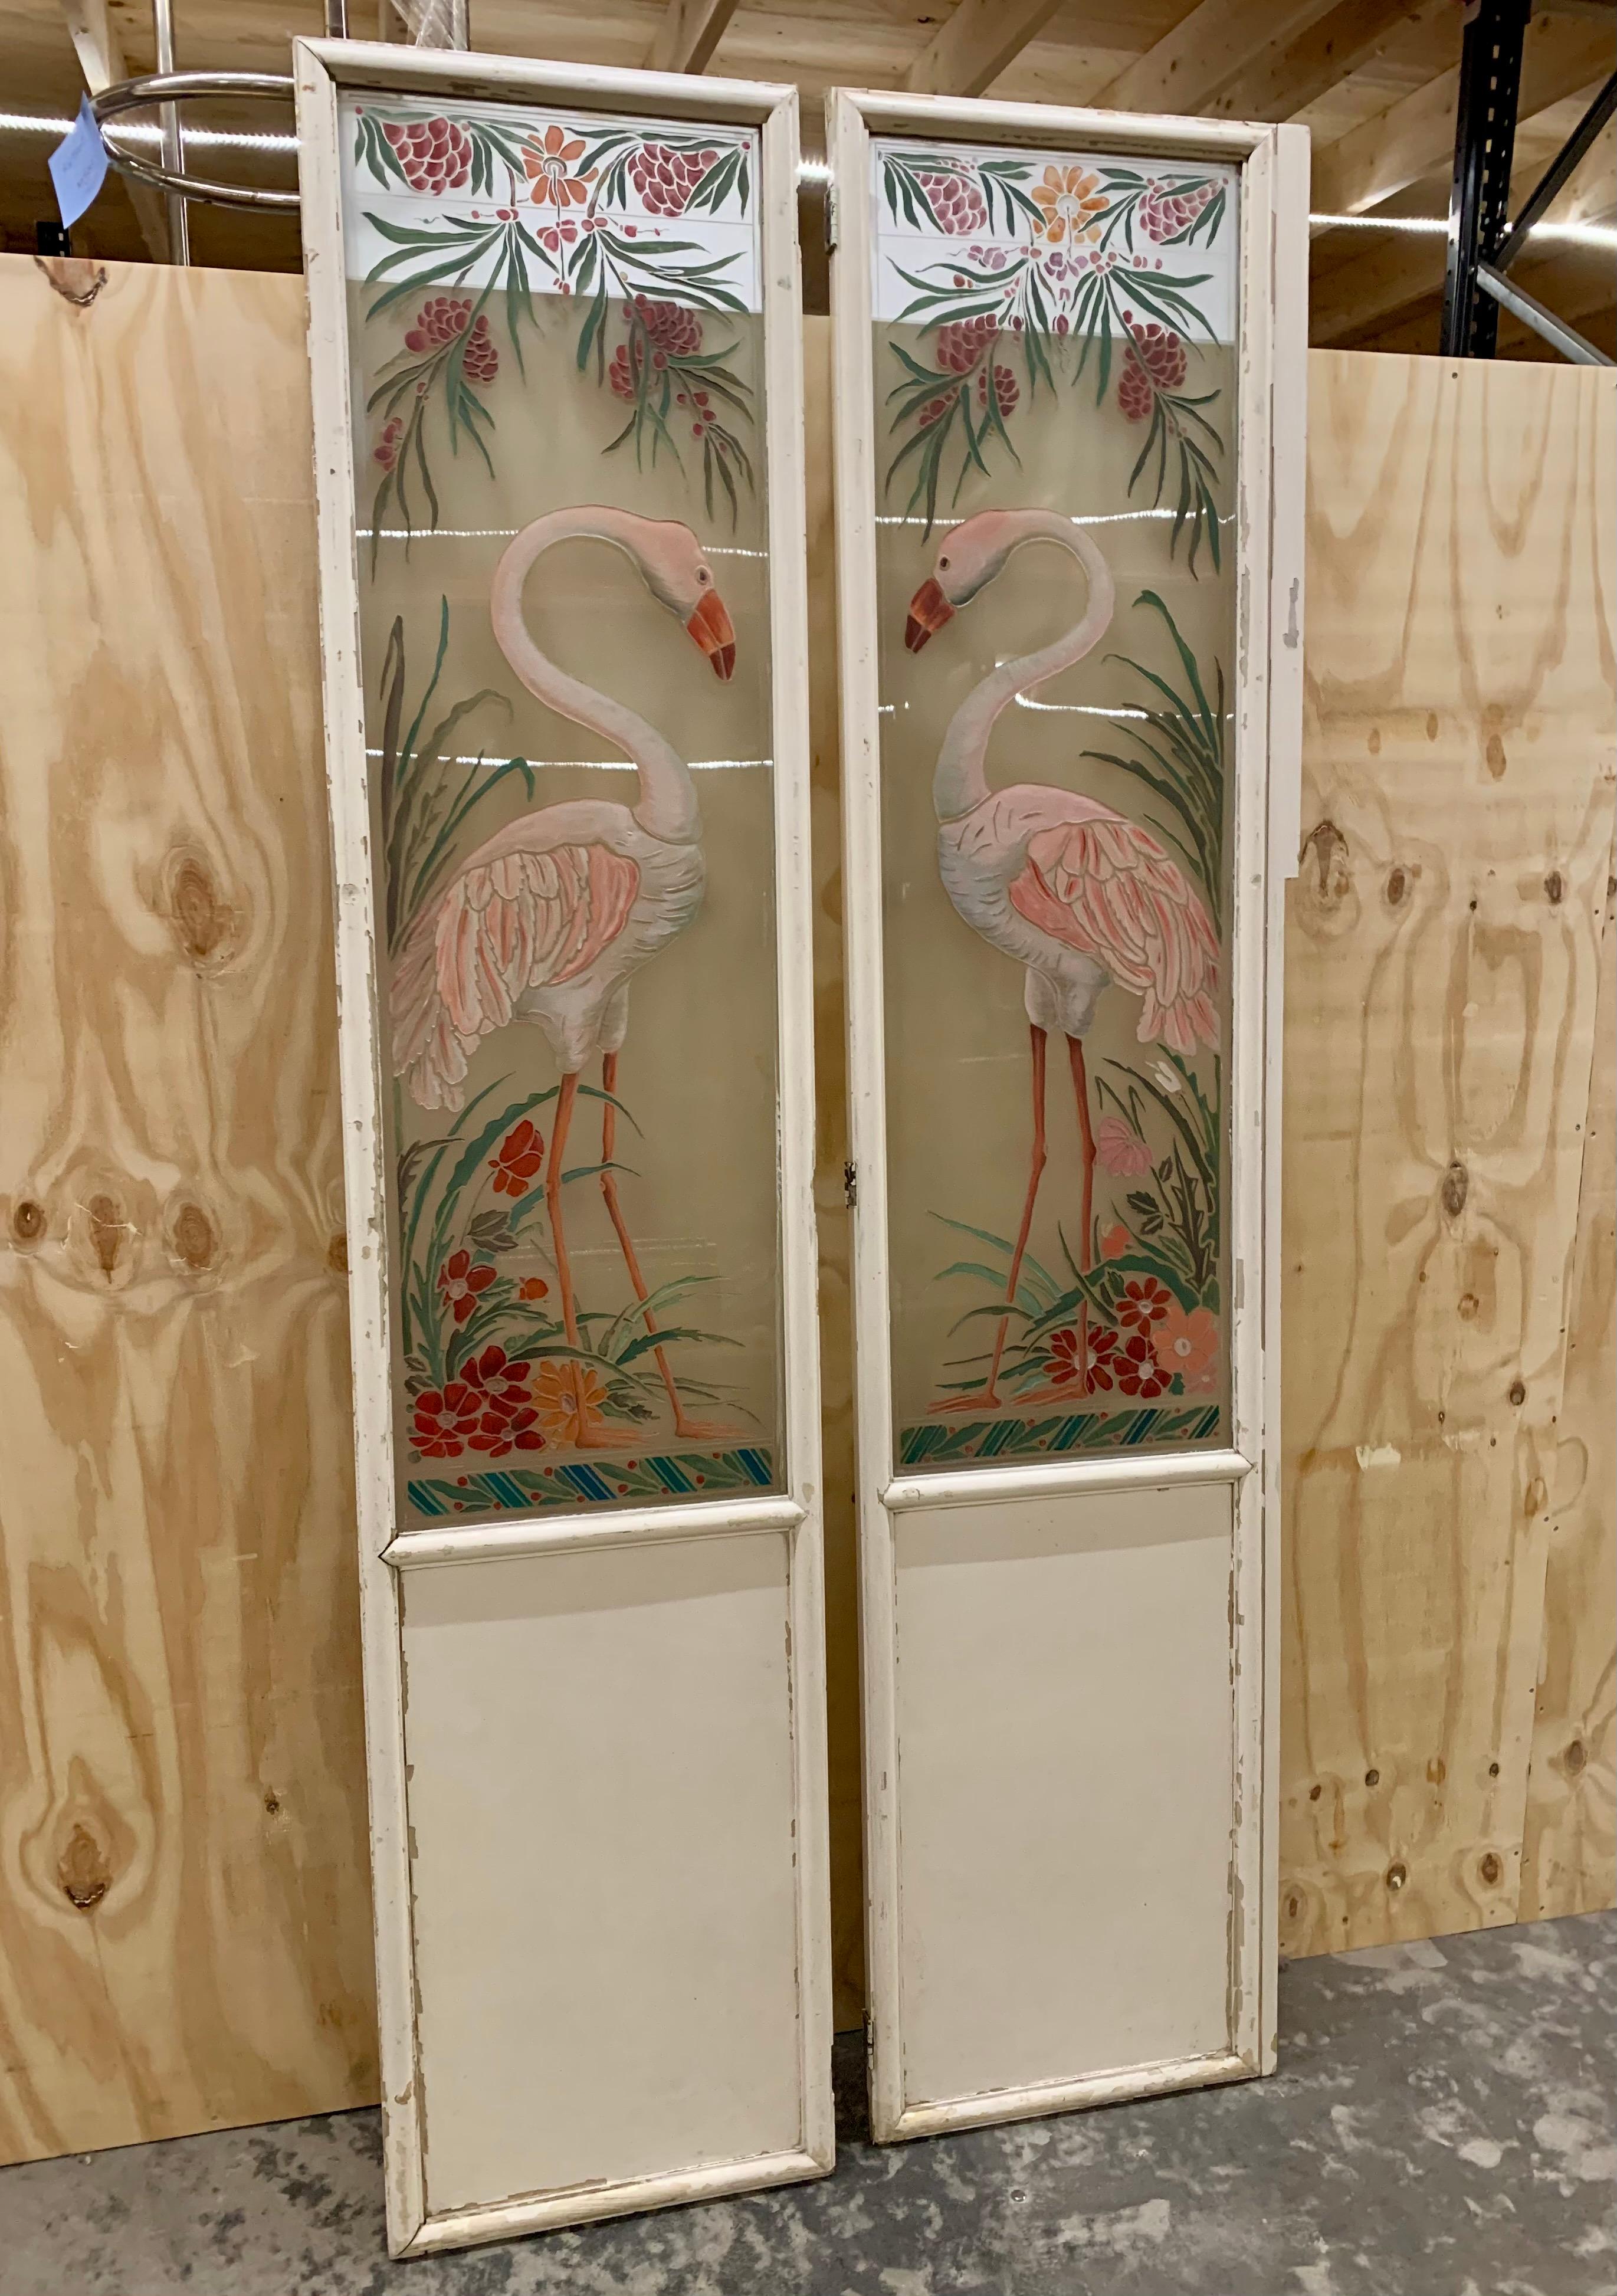 A set of glass doors with the most enchanting handpainted motives of Flamingos, flowers and foliage - would add great ambiance to any room...